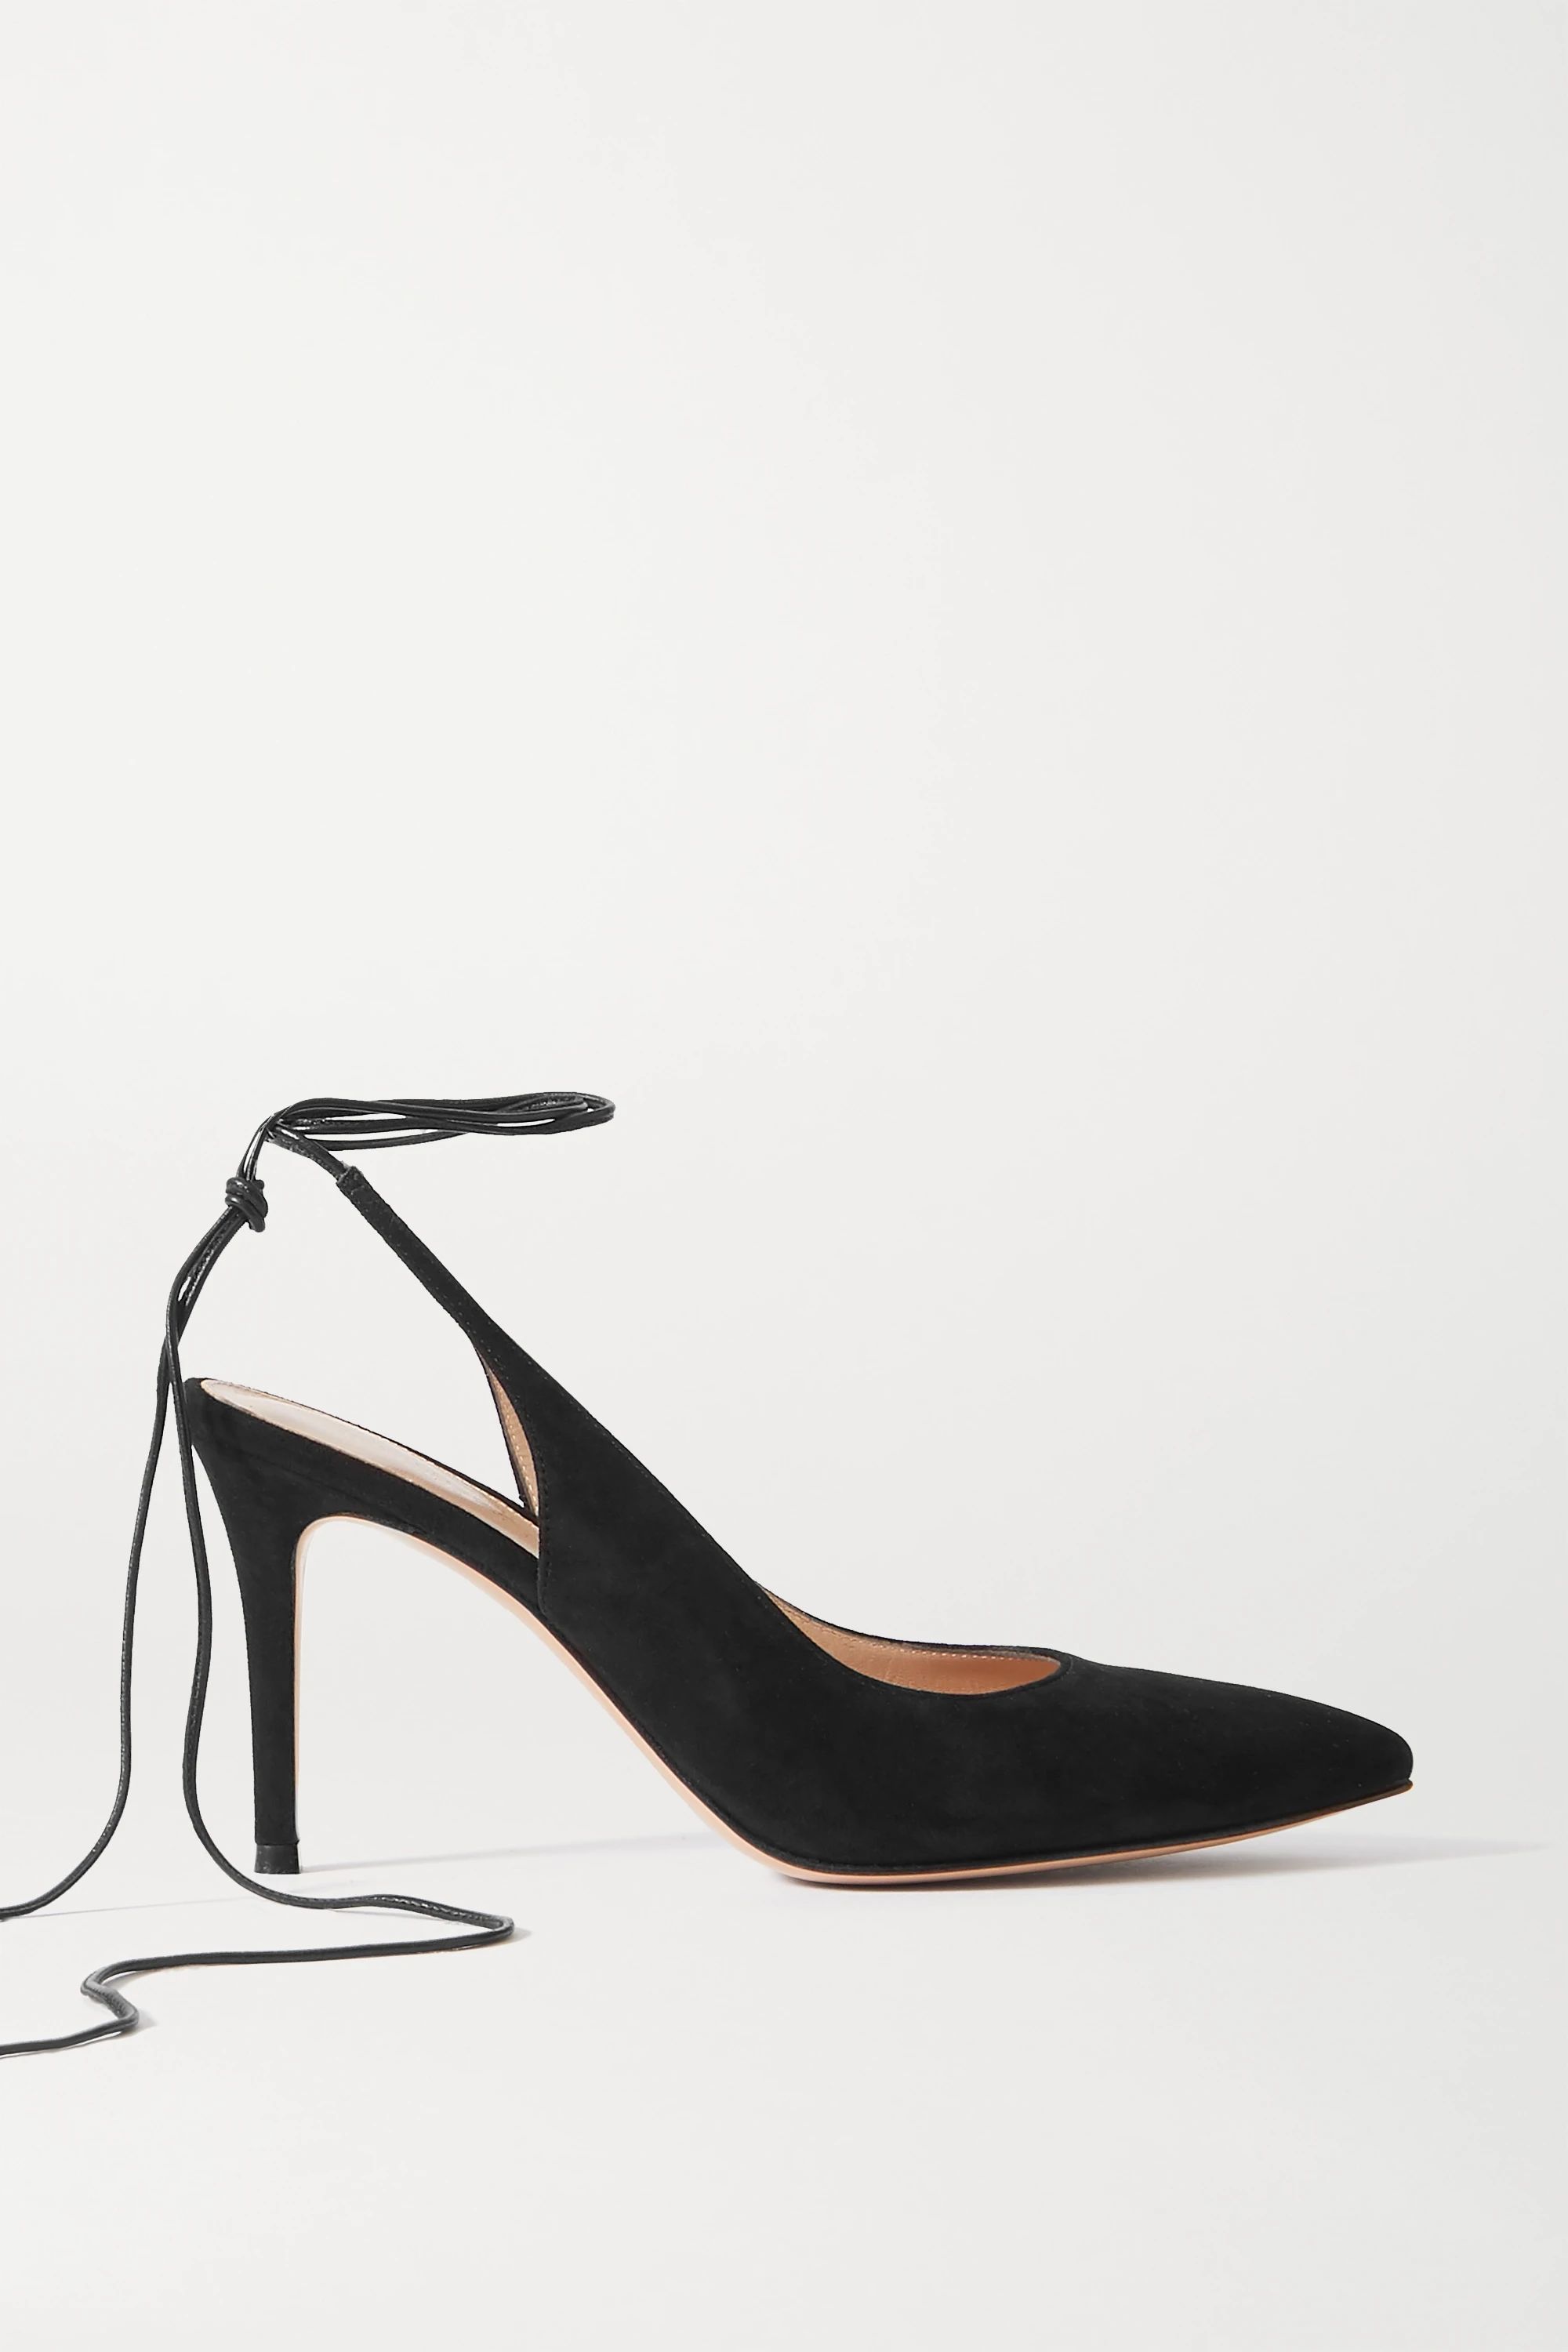 Black 85 leather-trimmed suede pumps | Gianvito Rossi | NET-A-PORTER | NET-A-PORTER (US)